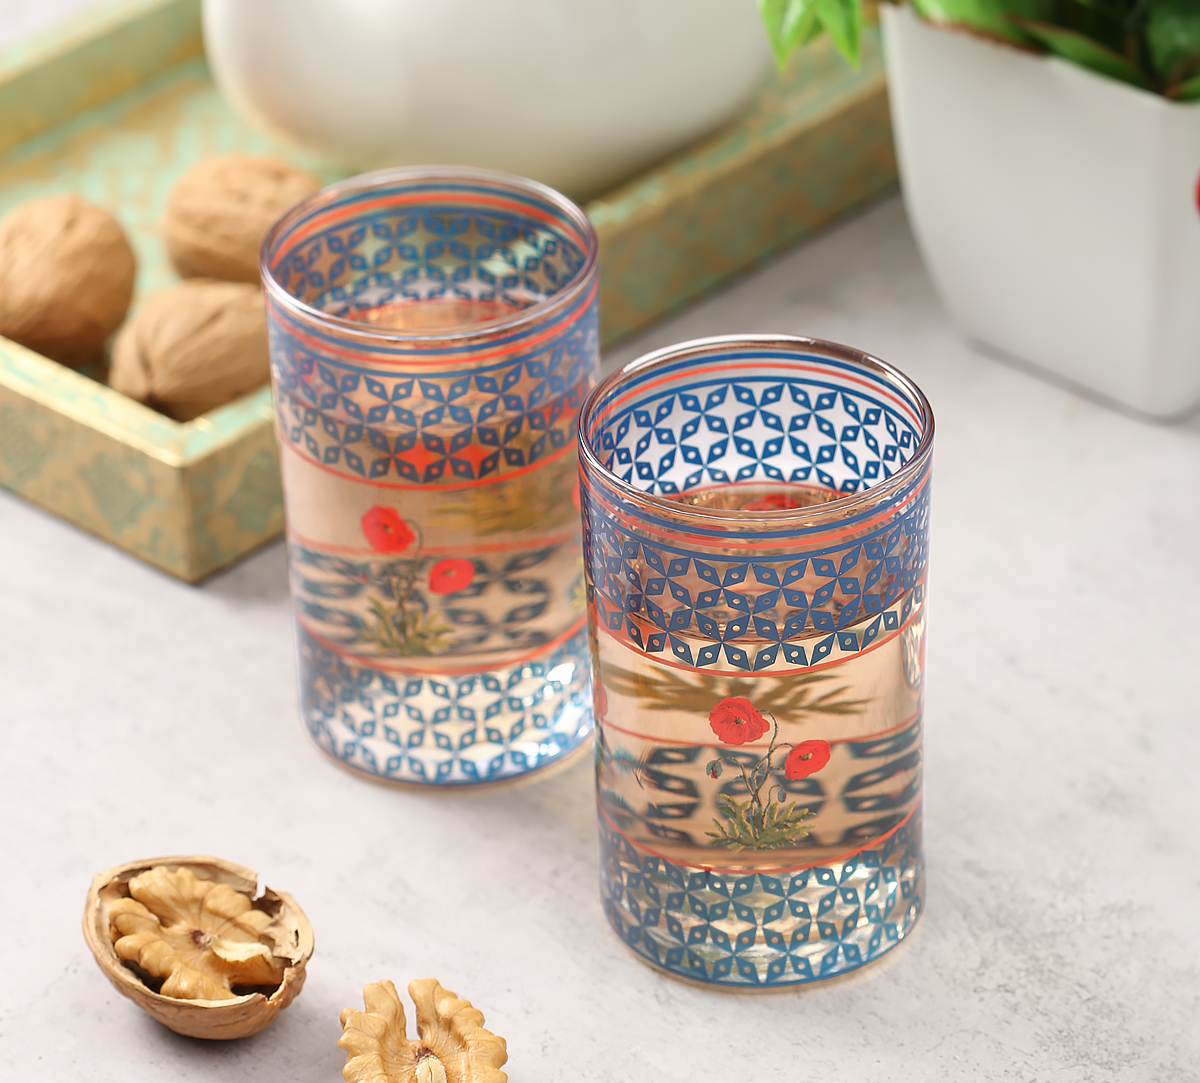 Flowers and Ferns Small Glass Tumbler (Set of 2)